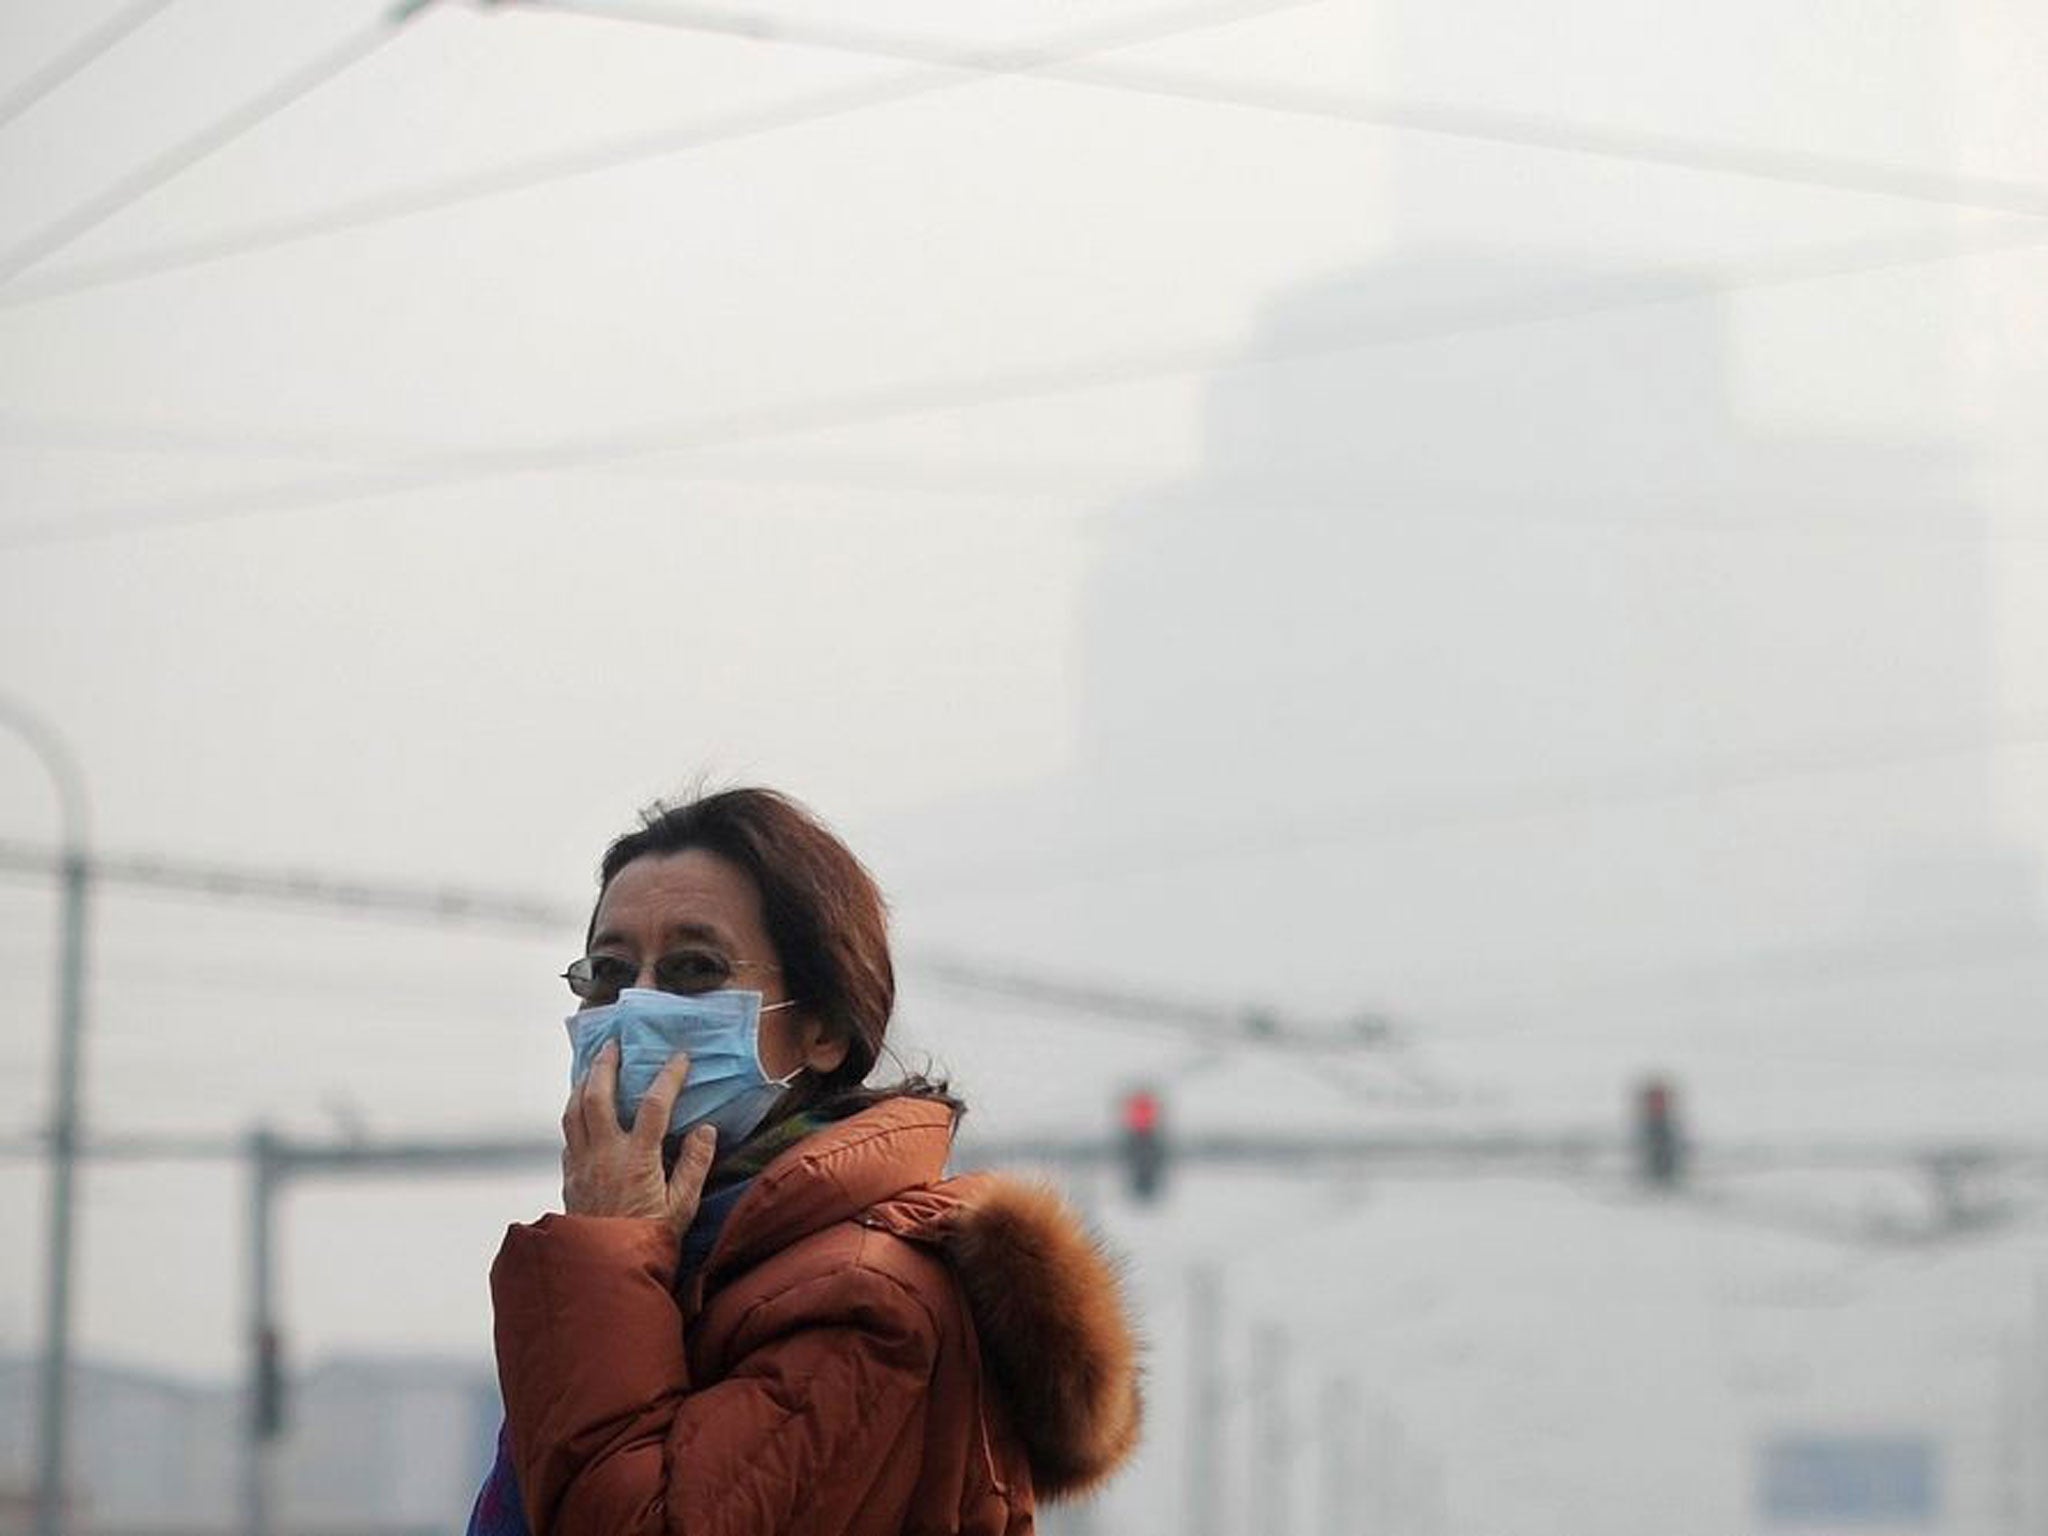 China's capital was shrouded in thick smog on 16 January, cutting visibility down to a few hundred yards as a count of small particulate pollution reached more than 20 times WHO-recommended levels